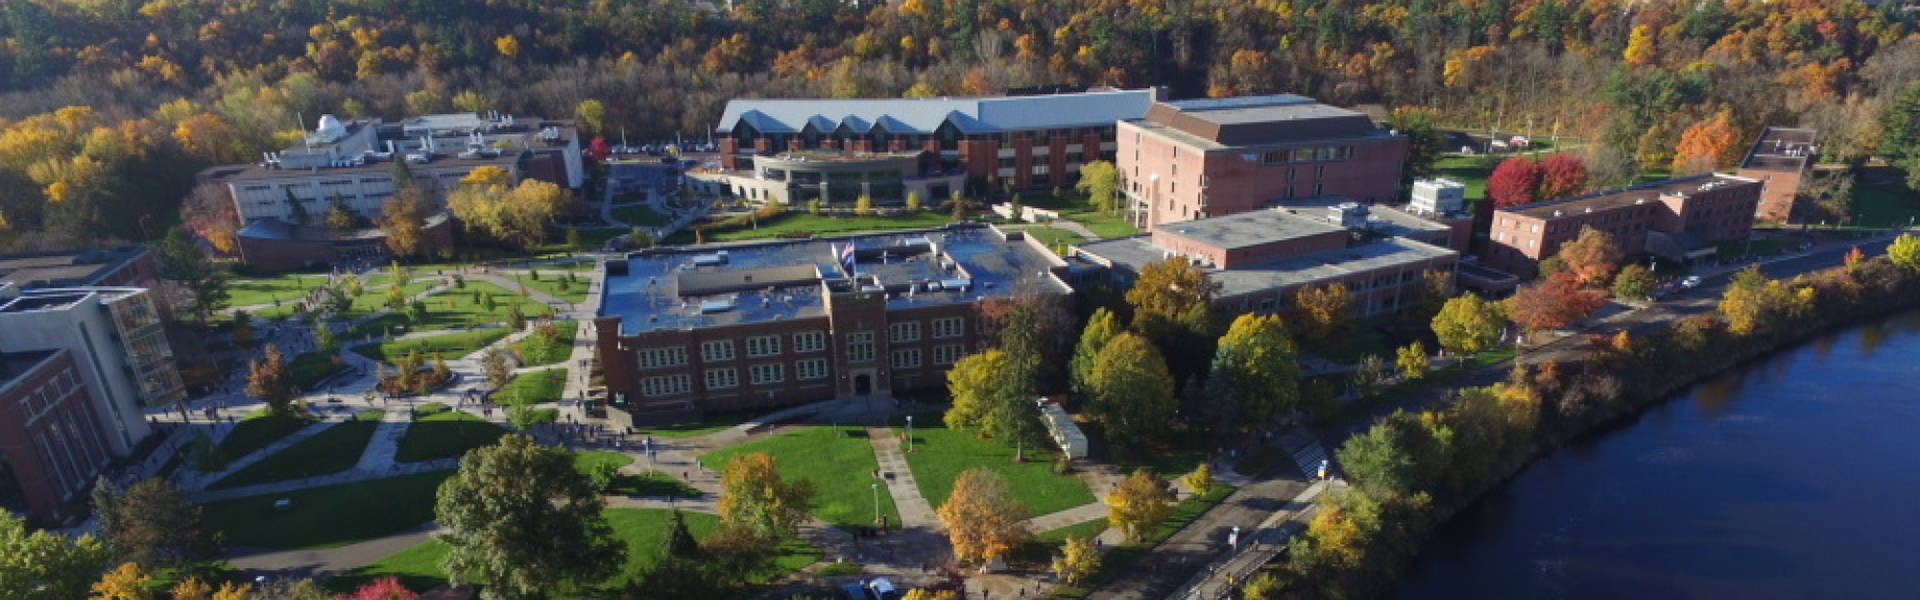 aerial view of lower campus